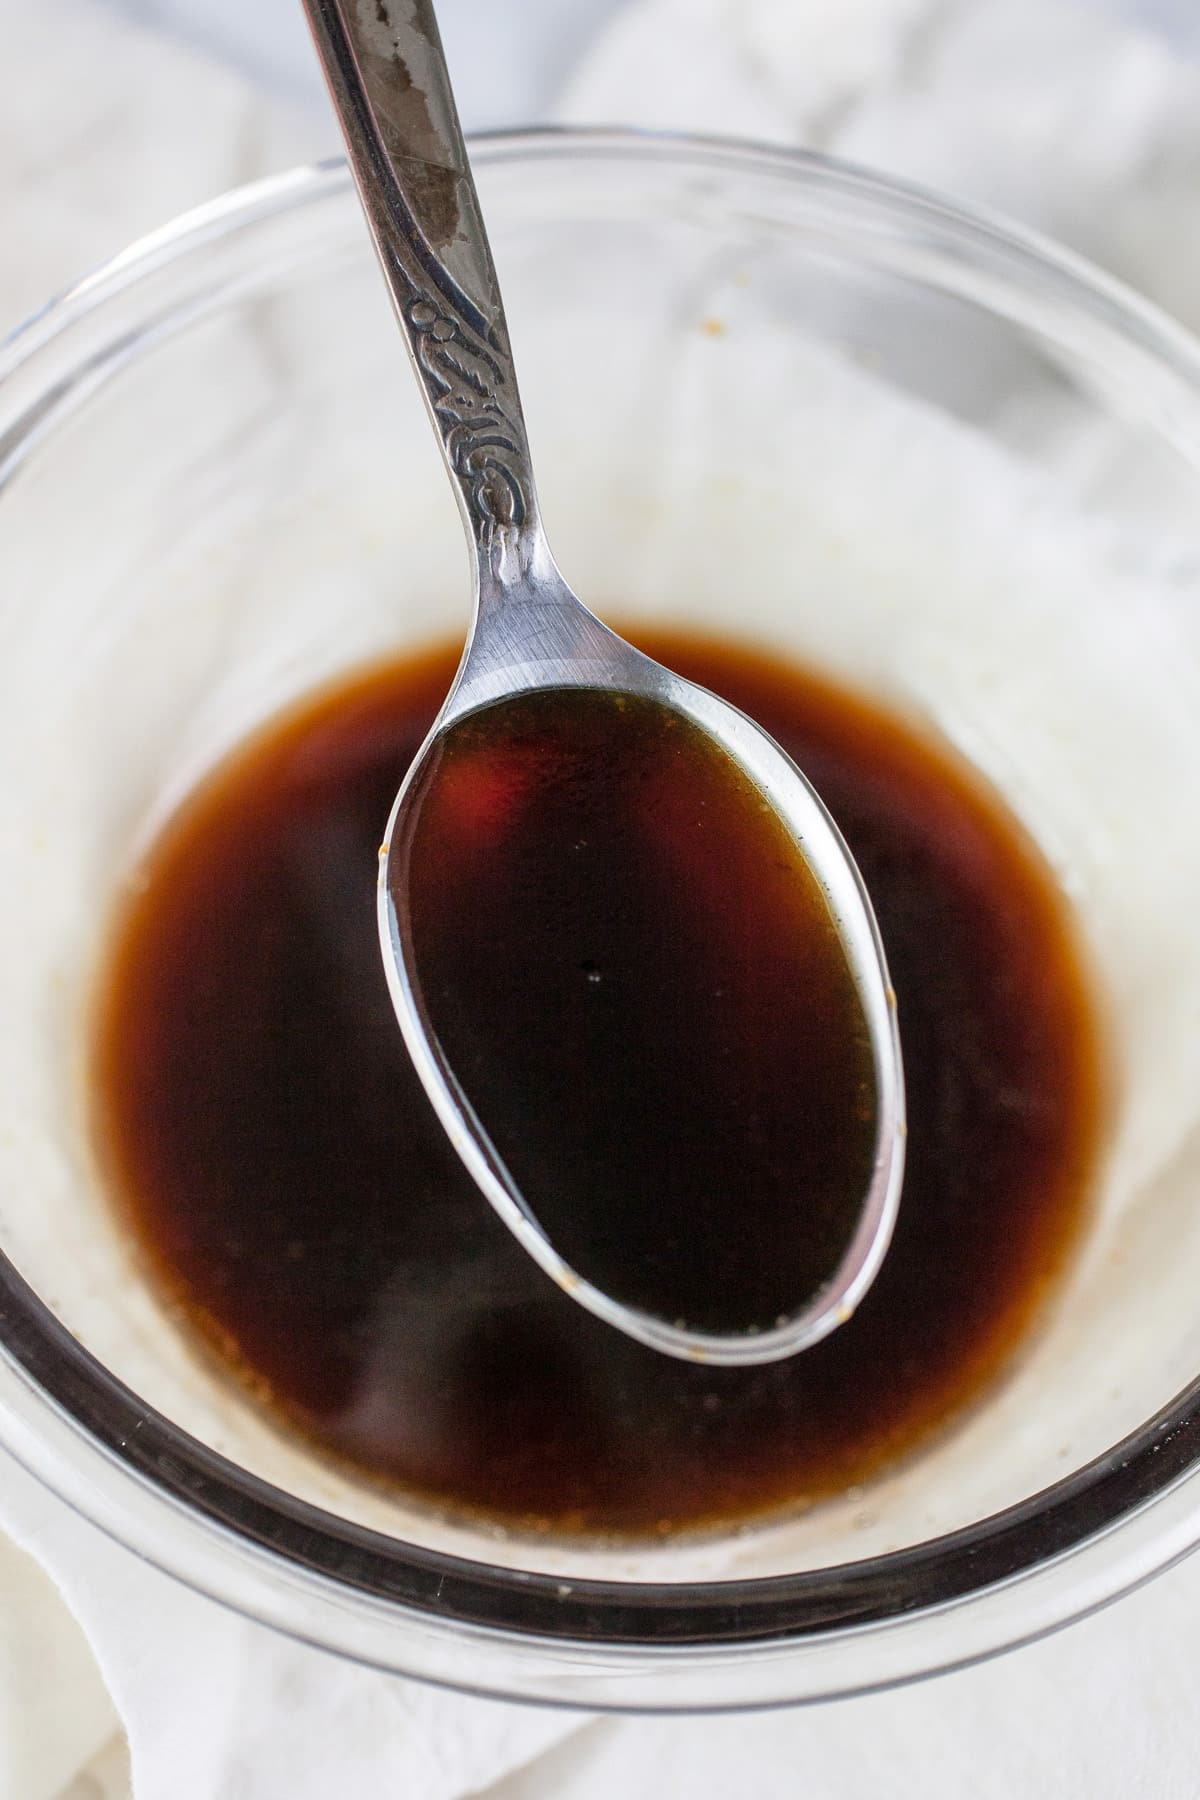 Maple sesame glaze on spoon lifted from small glass bowl.